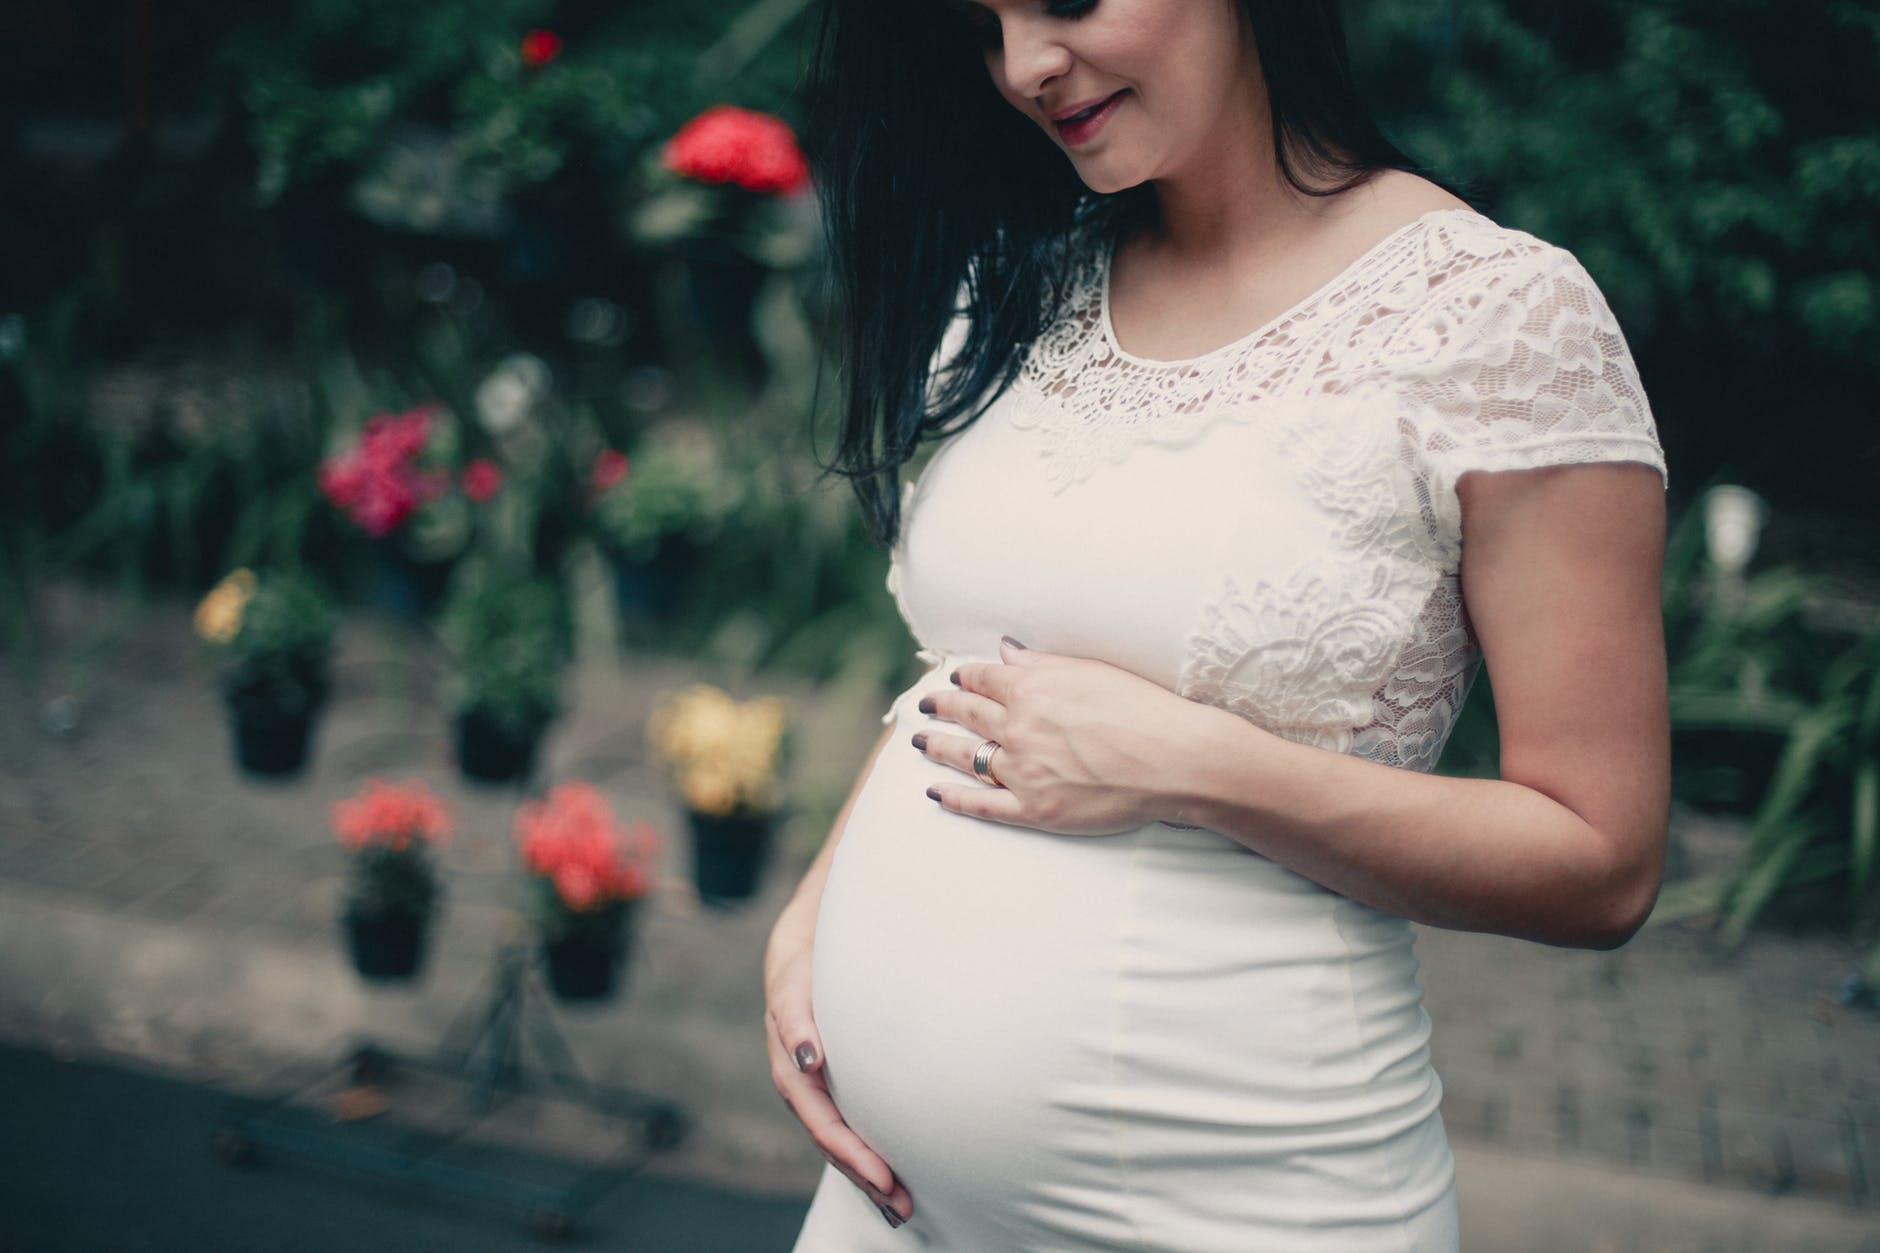 Maternity Photos That Capture the Beauty & Power of Pregnancy